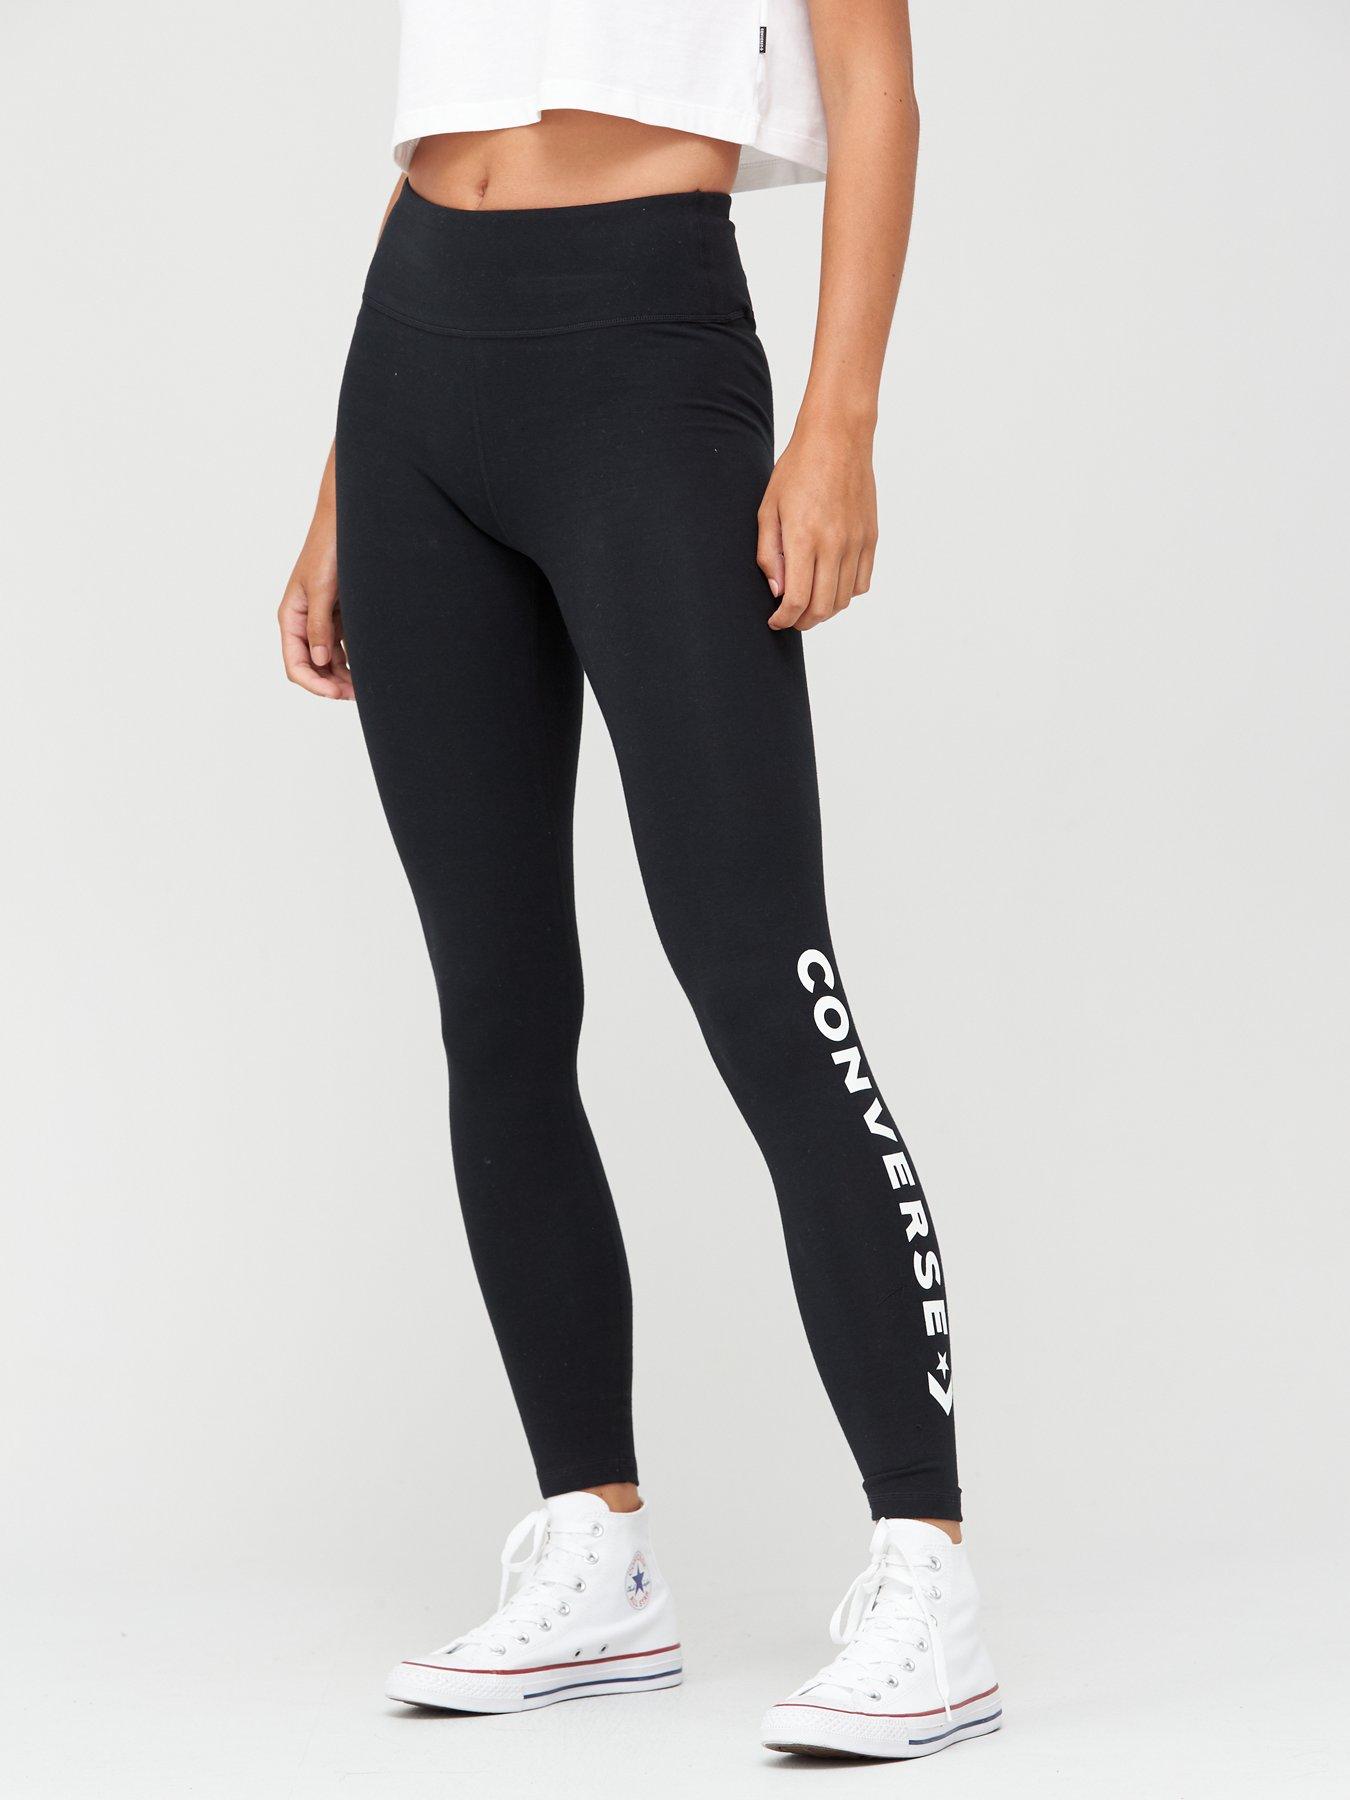 Tommy Hilfiger Women's Logo Taping Stretch High Rise Legging, Black at   Women's Clothing store